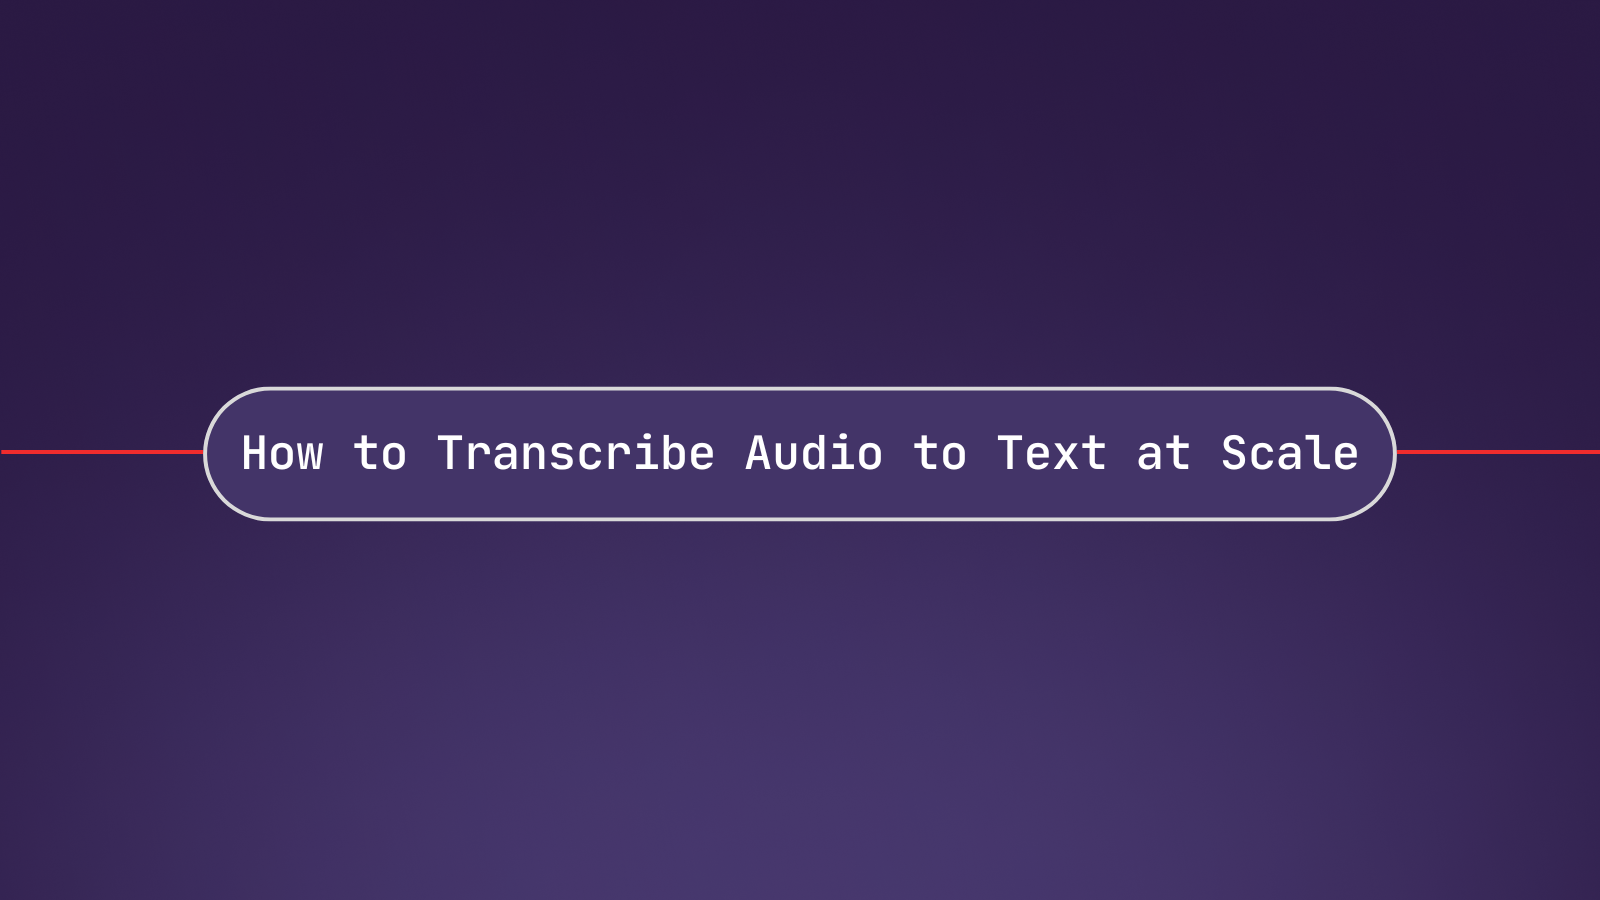 How to Transcribe Audio to Text Accurately at Scale